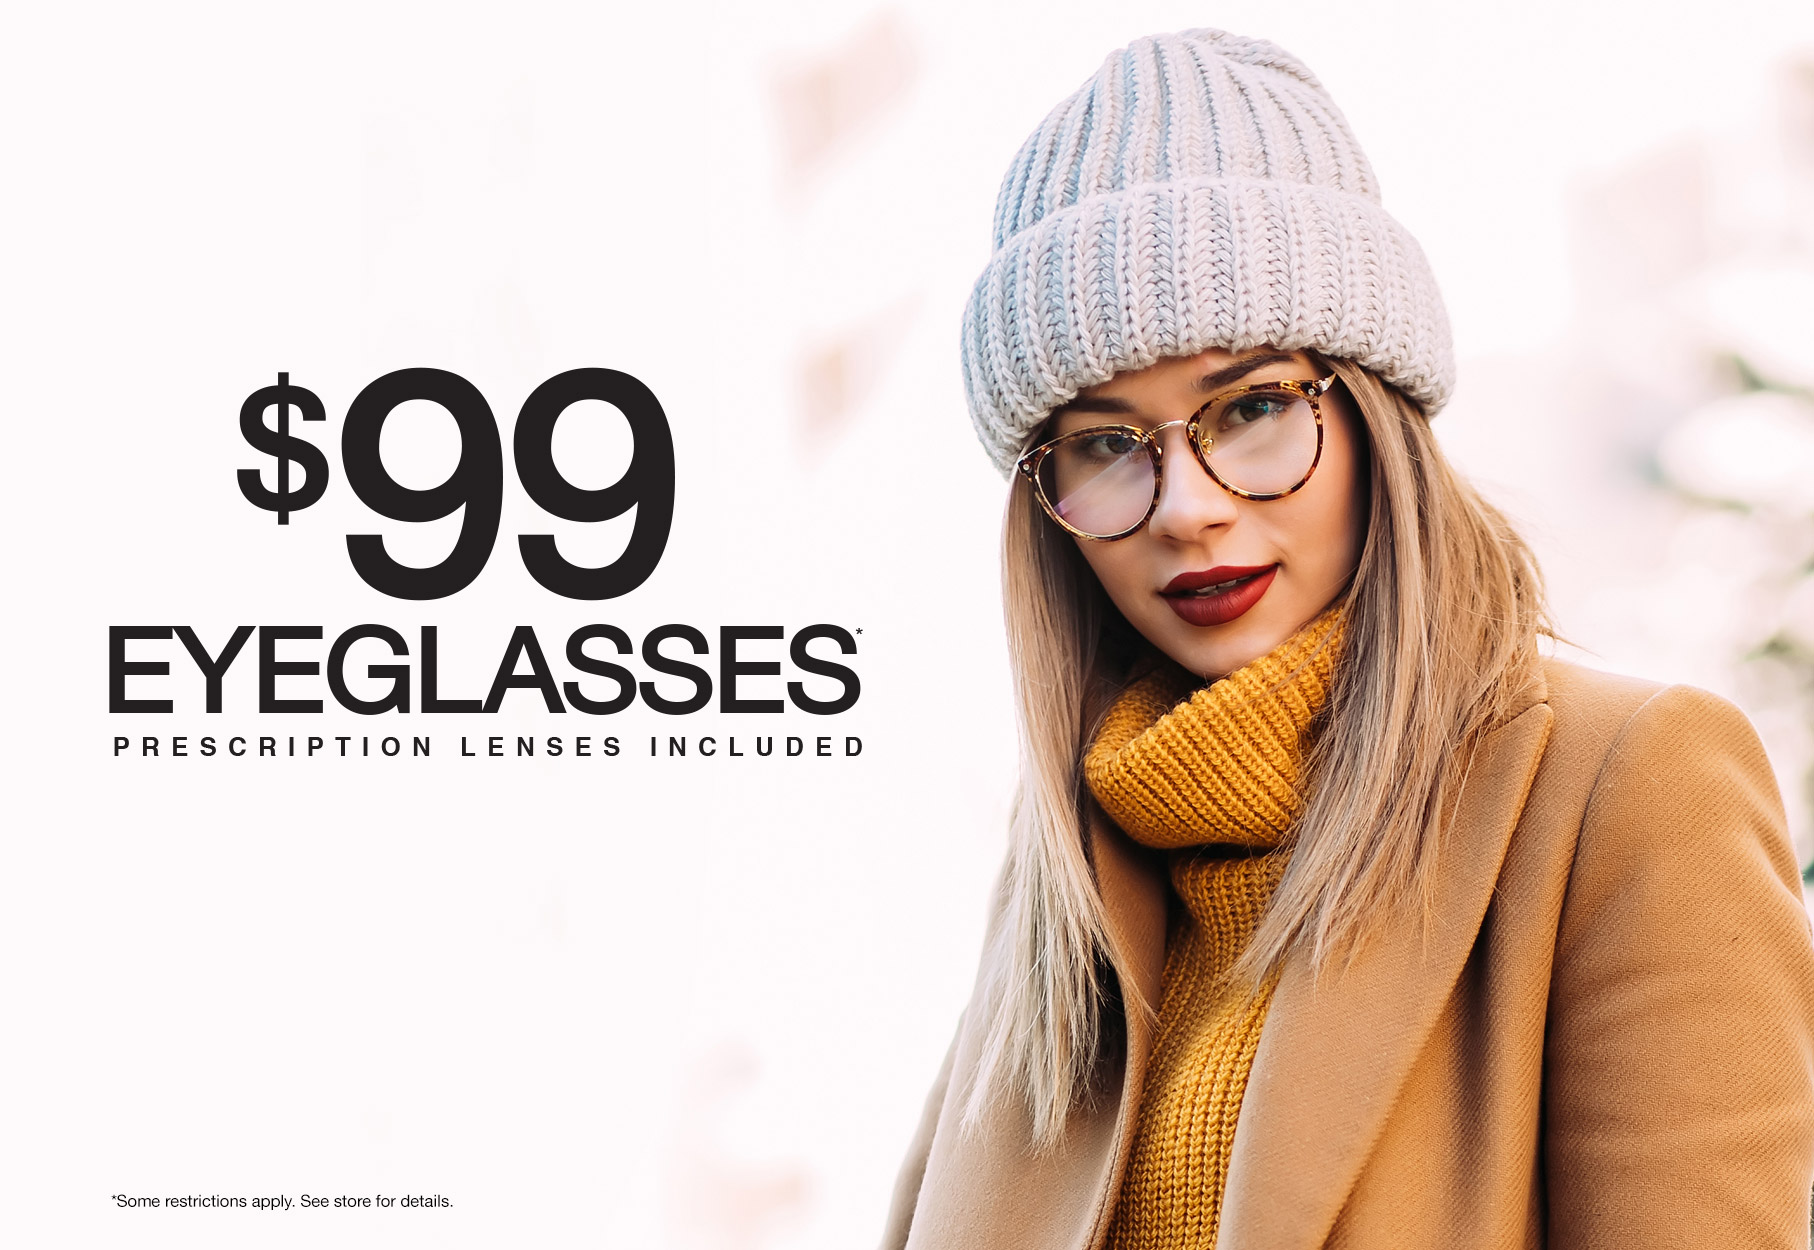 Text: $99 Eyeglasses* Prescription Lenses Included *Some restrictions apply. See store for details. Photo: Young woman wearing a sweater, hat, and eyeglasses